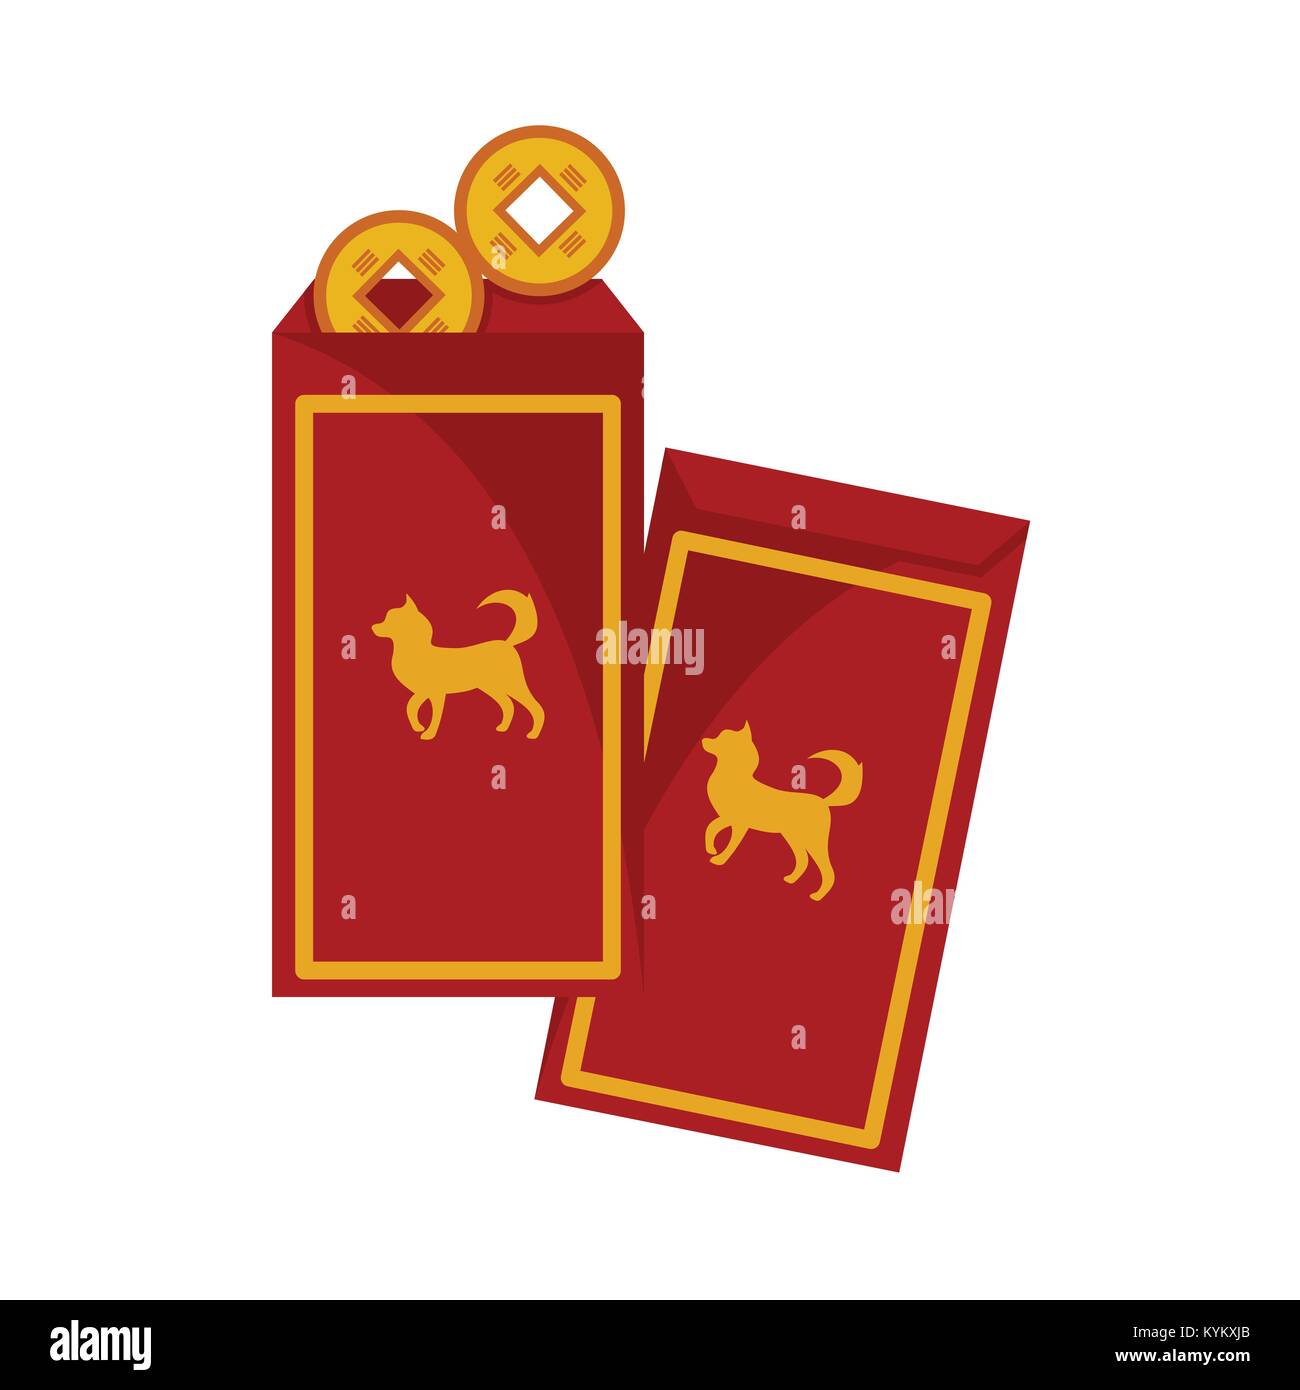 6 Year PNG Image, Year Of The Ox Cartoon Red Envelope 6, Chinese New Year, Red  Envelope, Year Of The Ox PNG Image For Free Download